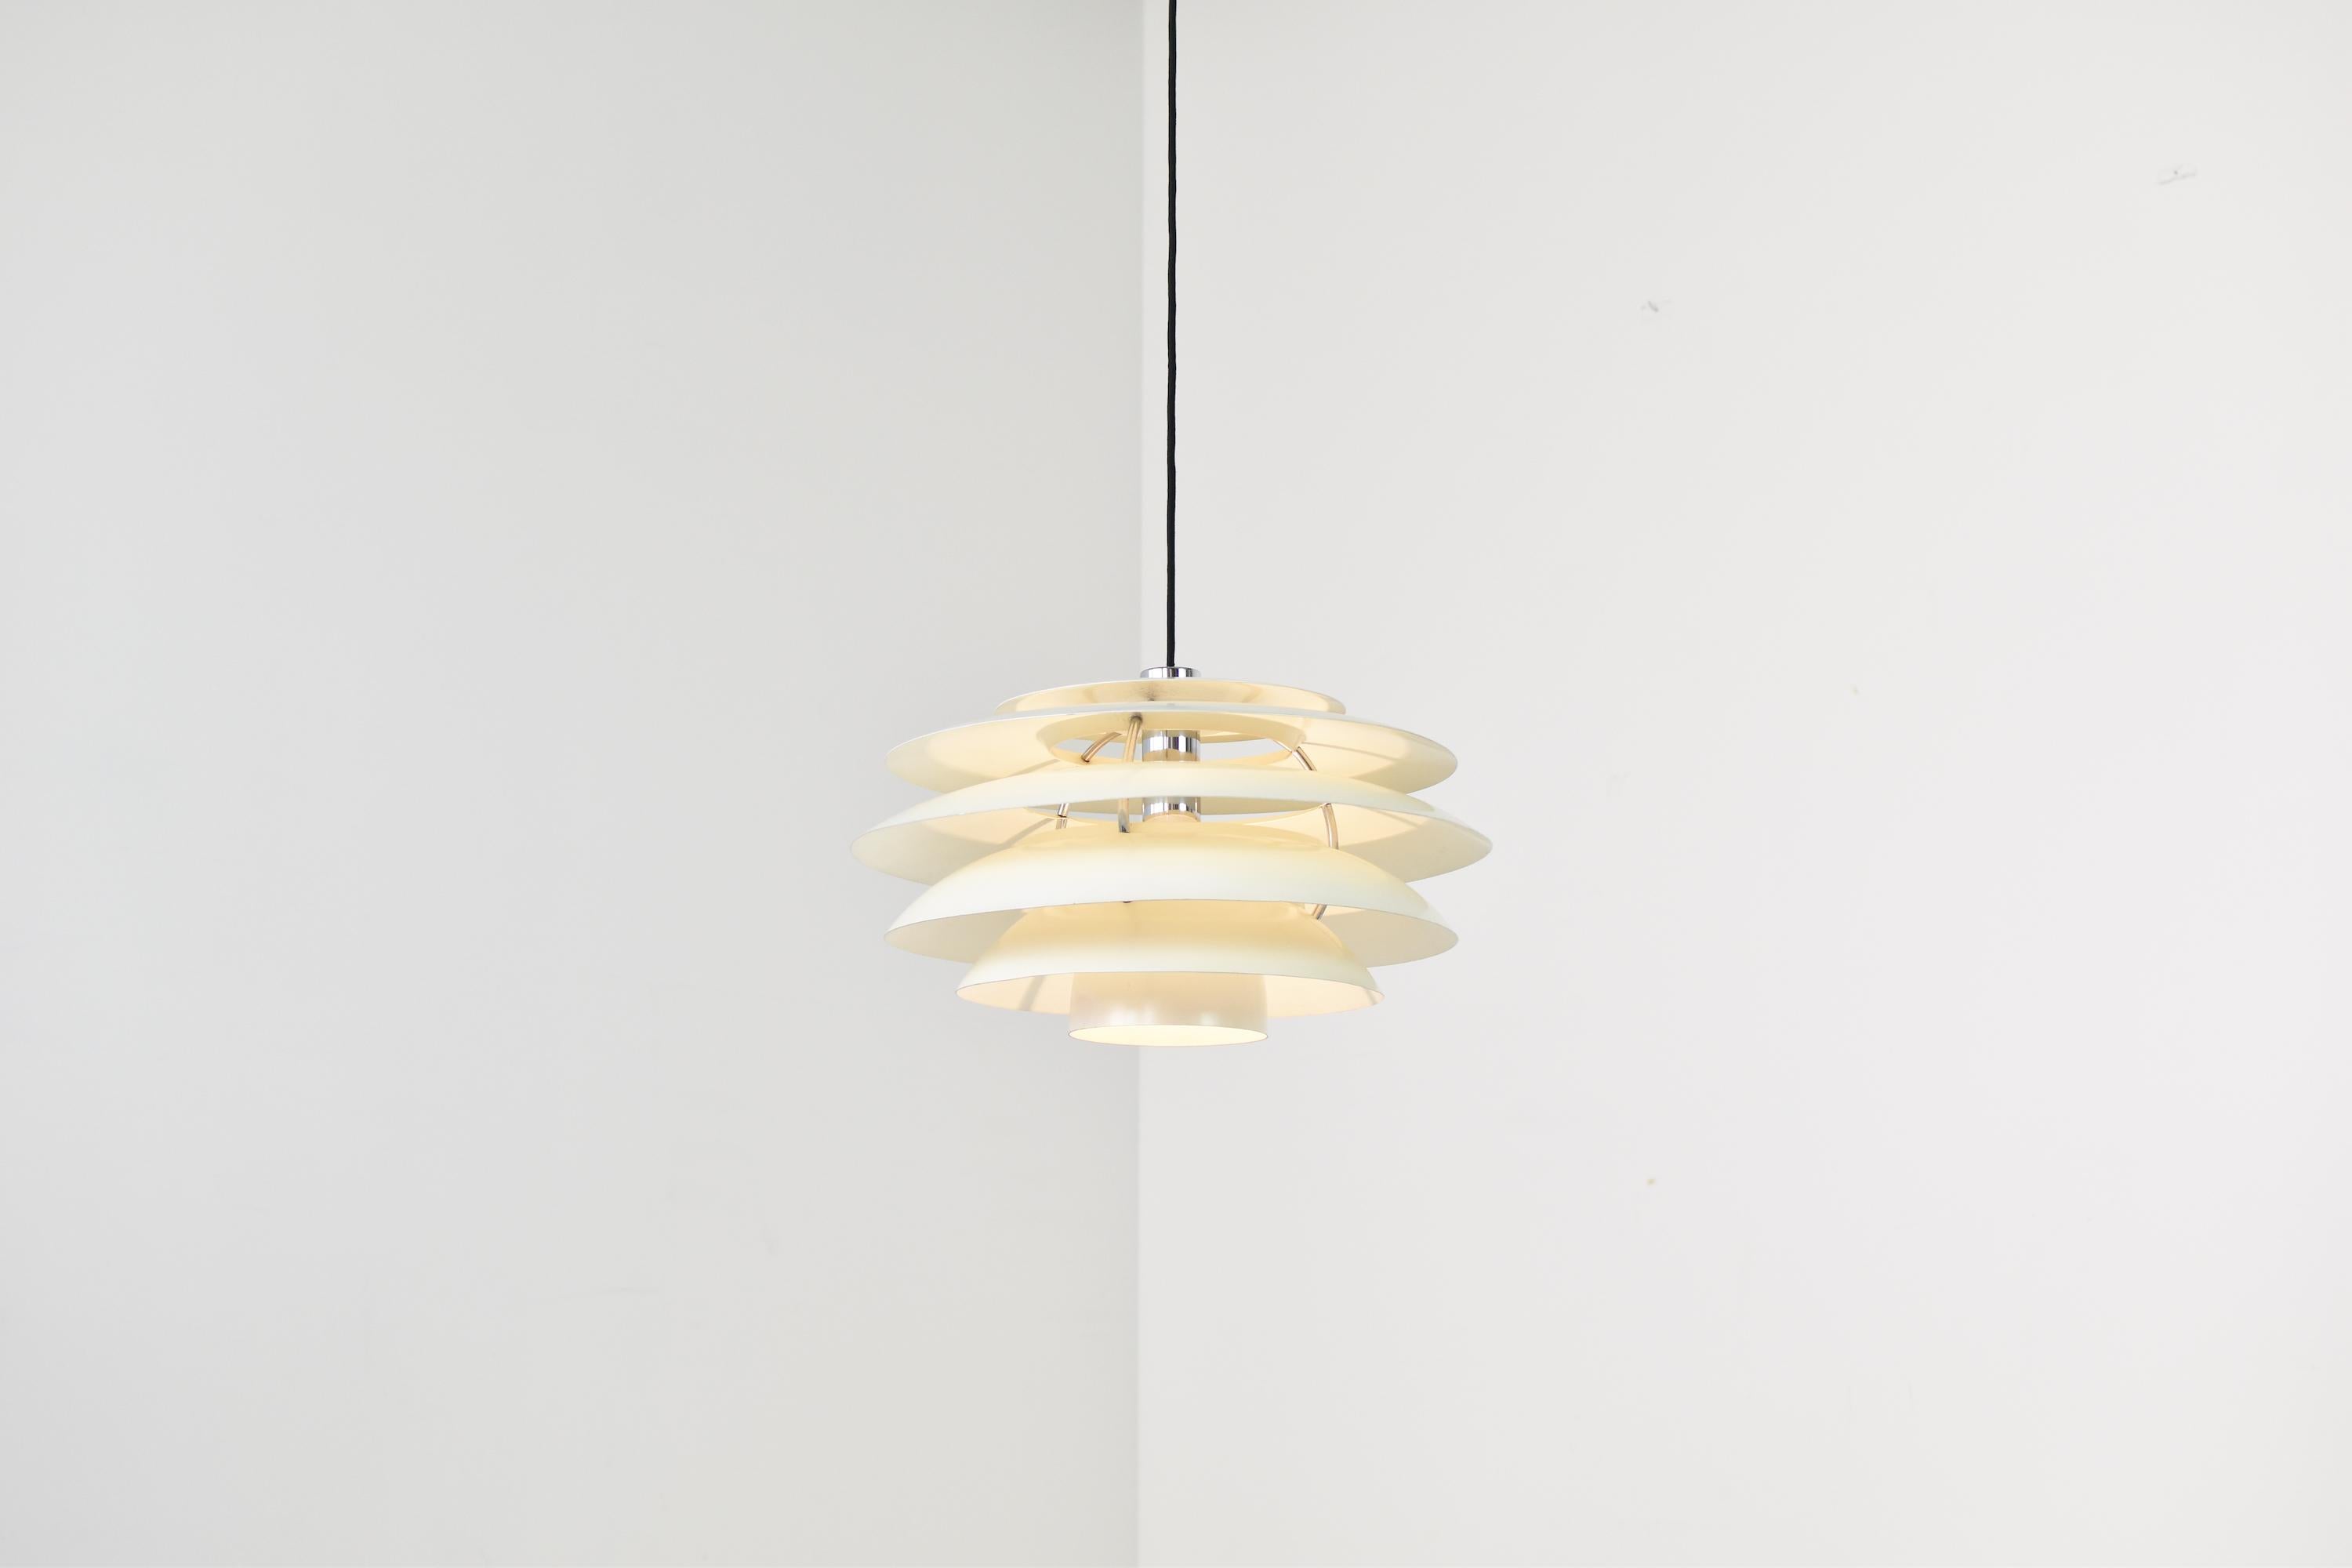 Pendant lamp Model No. 1262 by Stilnovo, Italy 1960s. This lamp features an aluminium structure with aluminium layered shades. Good original condition with only minor wear. Labeled.